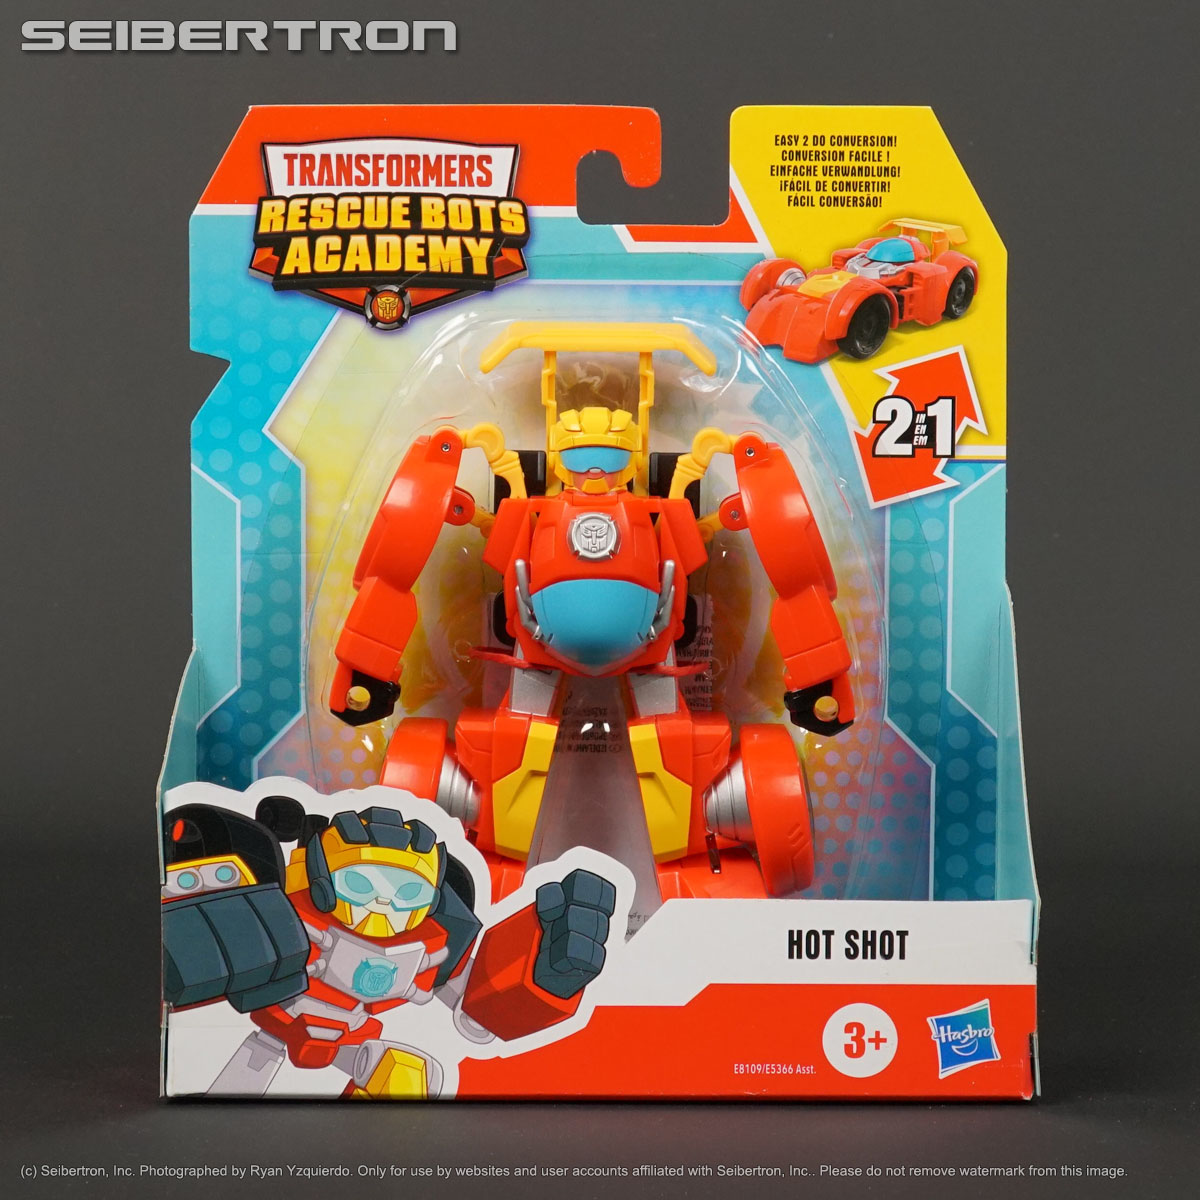 Rescan HOT SHOT Transformers Rescue Bots Academy Dragster Car Hasbro 2020 New